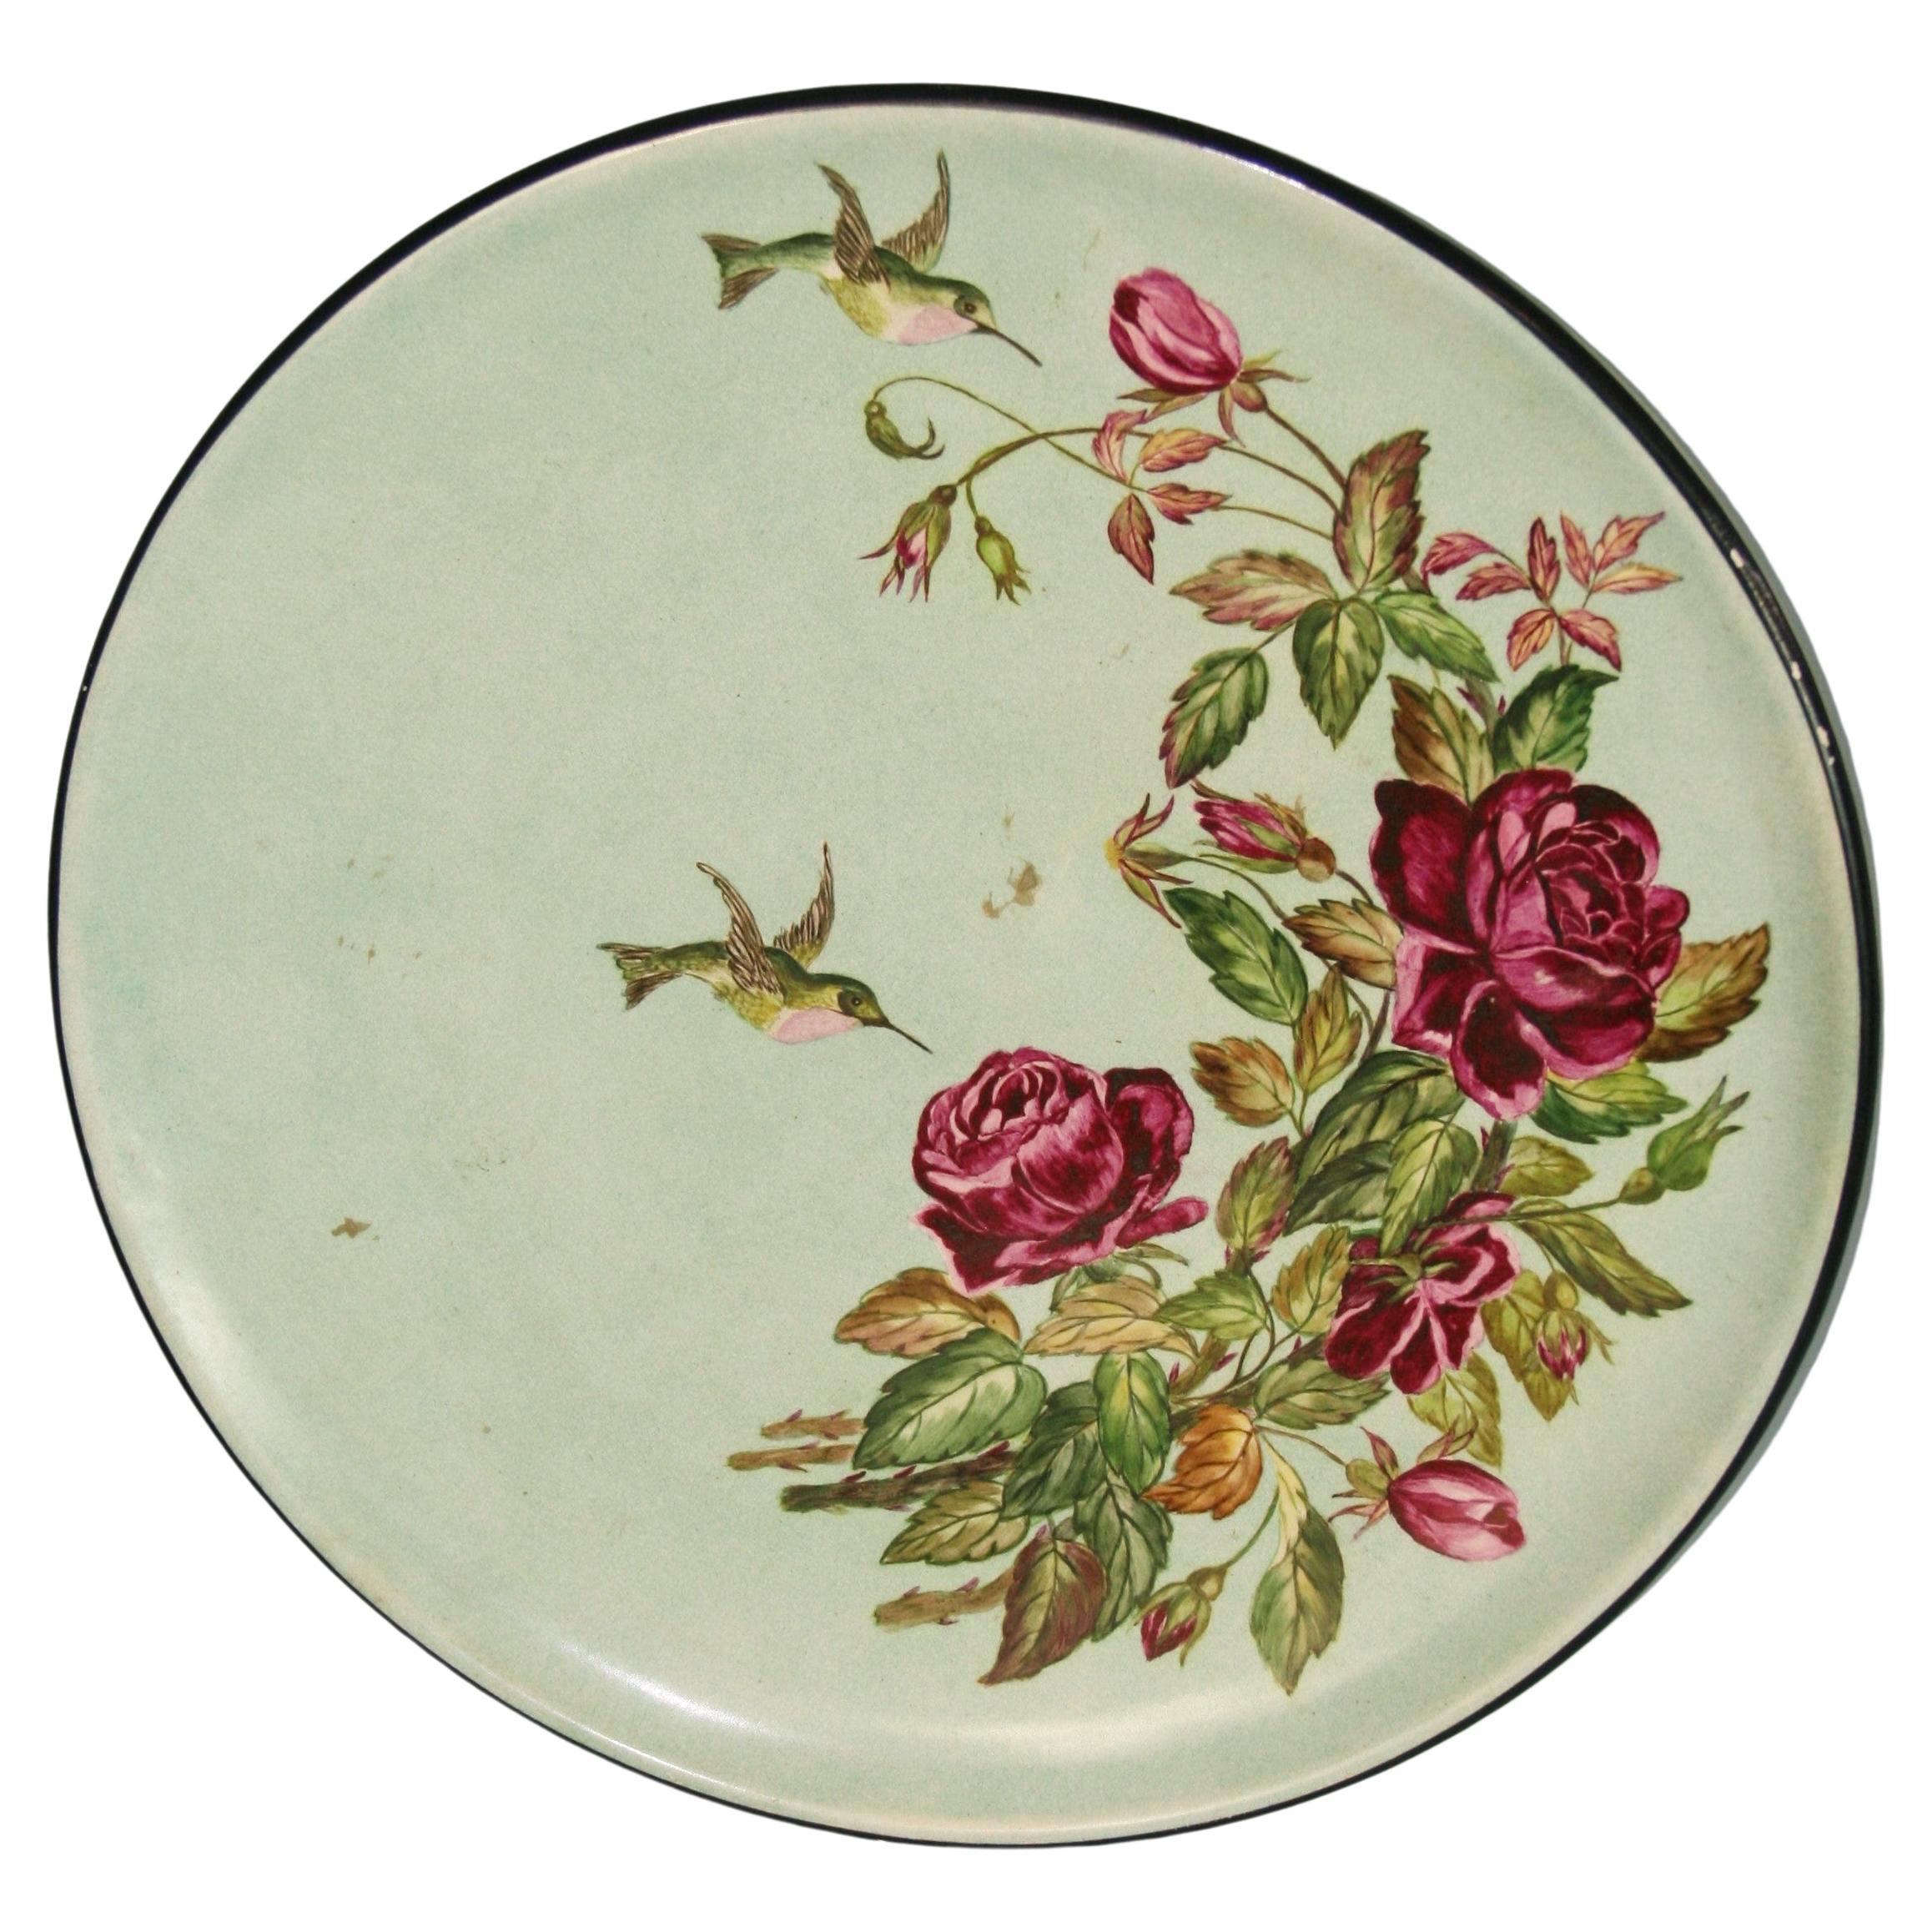 Vintage English   Ceramic  Charger with Humming Birds and Roses Decorations 1940